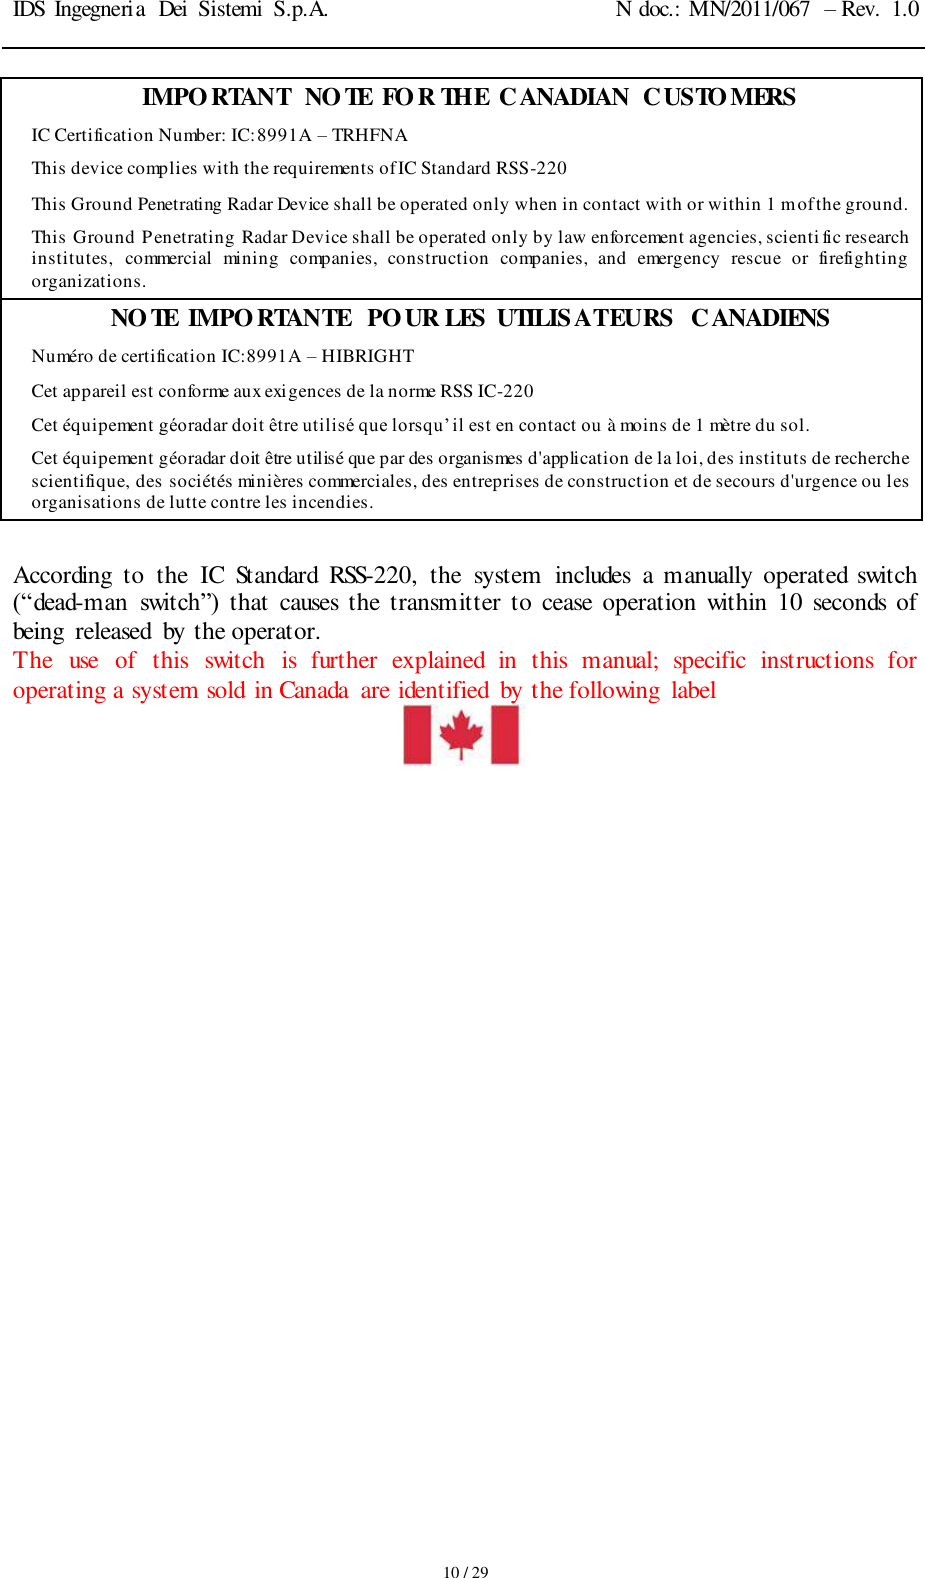 IDS Ingegneria  Dei  Sistemi  S.p.A. N doc.: MN/2011/067  – Rev.  1.0     10 / 29 IMPORTANT  NOTE  FOR THE  CANADIAN  CUSTOMERS IC Certification Number: IC:8991A – TRHFNA This device complies with the requirements of IC Standard RSS-220 This Ground Penetrating Radar Device shall be operated only when in contact with or within 1 m of the ground. This Ground Penetrating Radar Device shall be operated only by law enforcement agencies, scienti fic research institutes,  commercial  mining  companies,  construction  companies,  and  emergency  rescue  or  firefighting organizations. NOTE  IMPORTANTE  POUR LES  UTILISATEURS  CANADIENS Numéro de certification IC:8991A – HIBRIGHT Cet appareil est conforme aux exigences de la norme RSS IC-220 Cet équipement géoradar doit être utilisé que lorsqu’il est en contact ou à moins de 1 mètre du sol. Cet équipement géoradar doit être utilisé que par des organismes d&apos;application de la loi, des instituts de recherche scientifique, des sociétés minières commerciales, des entreprises de construction et de secours d&apos;urgence ou les organisations de lutte contre les incendies.  According  to  the  IC  Standard  RSS-220,  the  system  includes  a  manually operated  switch (“dead-man  switch”)  that  causes  the  transmitter  to  cease  operation within 10  seconds  of being  released  by the operator. The  use  of  this  switch  is  further  explained  in  this  manual;  specific  instructions  for operating a system sold  in Canada  are identified  by the following  label    